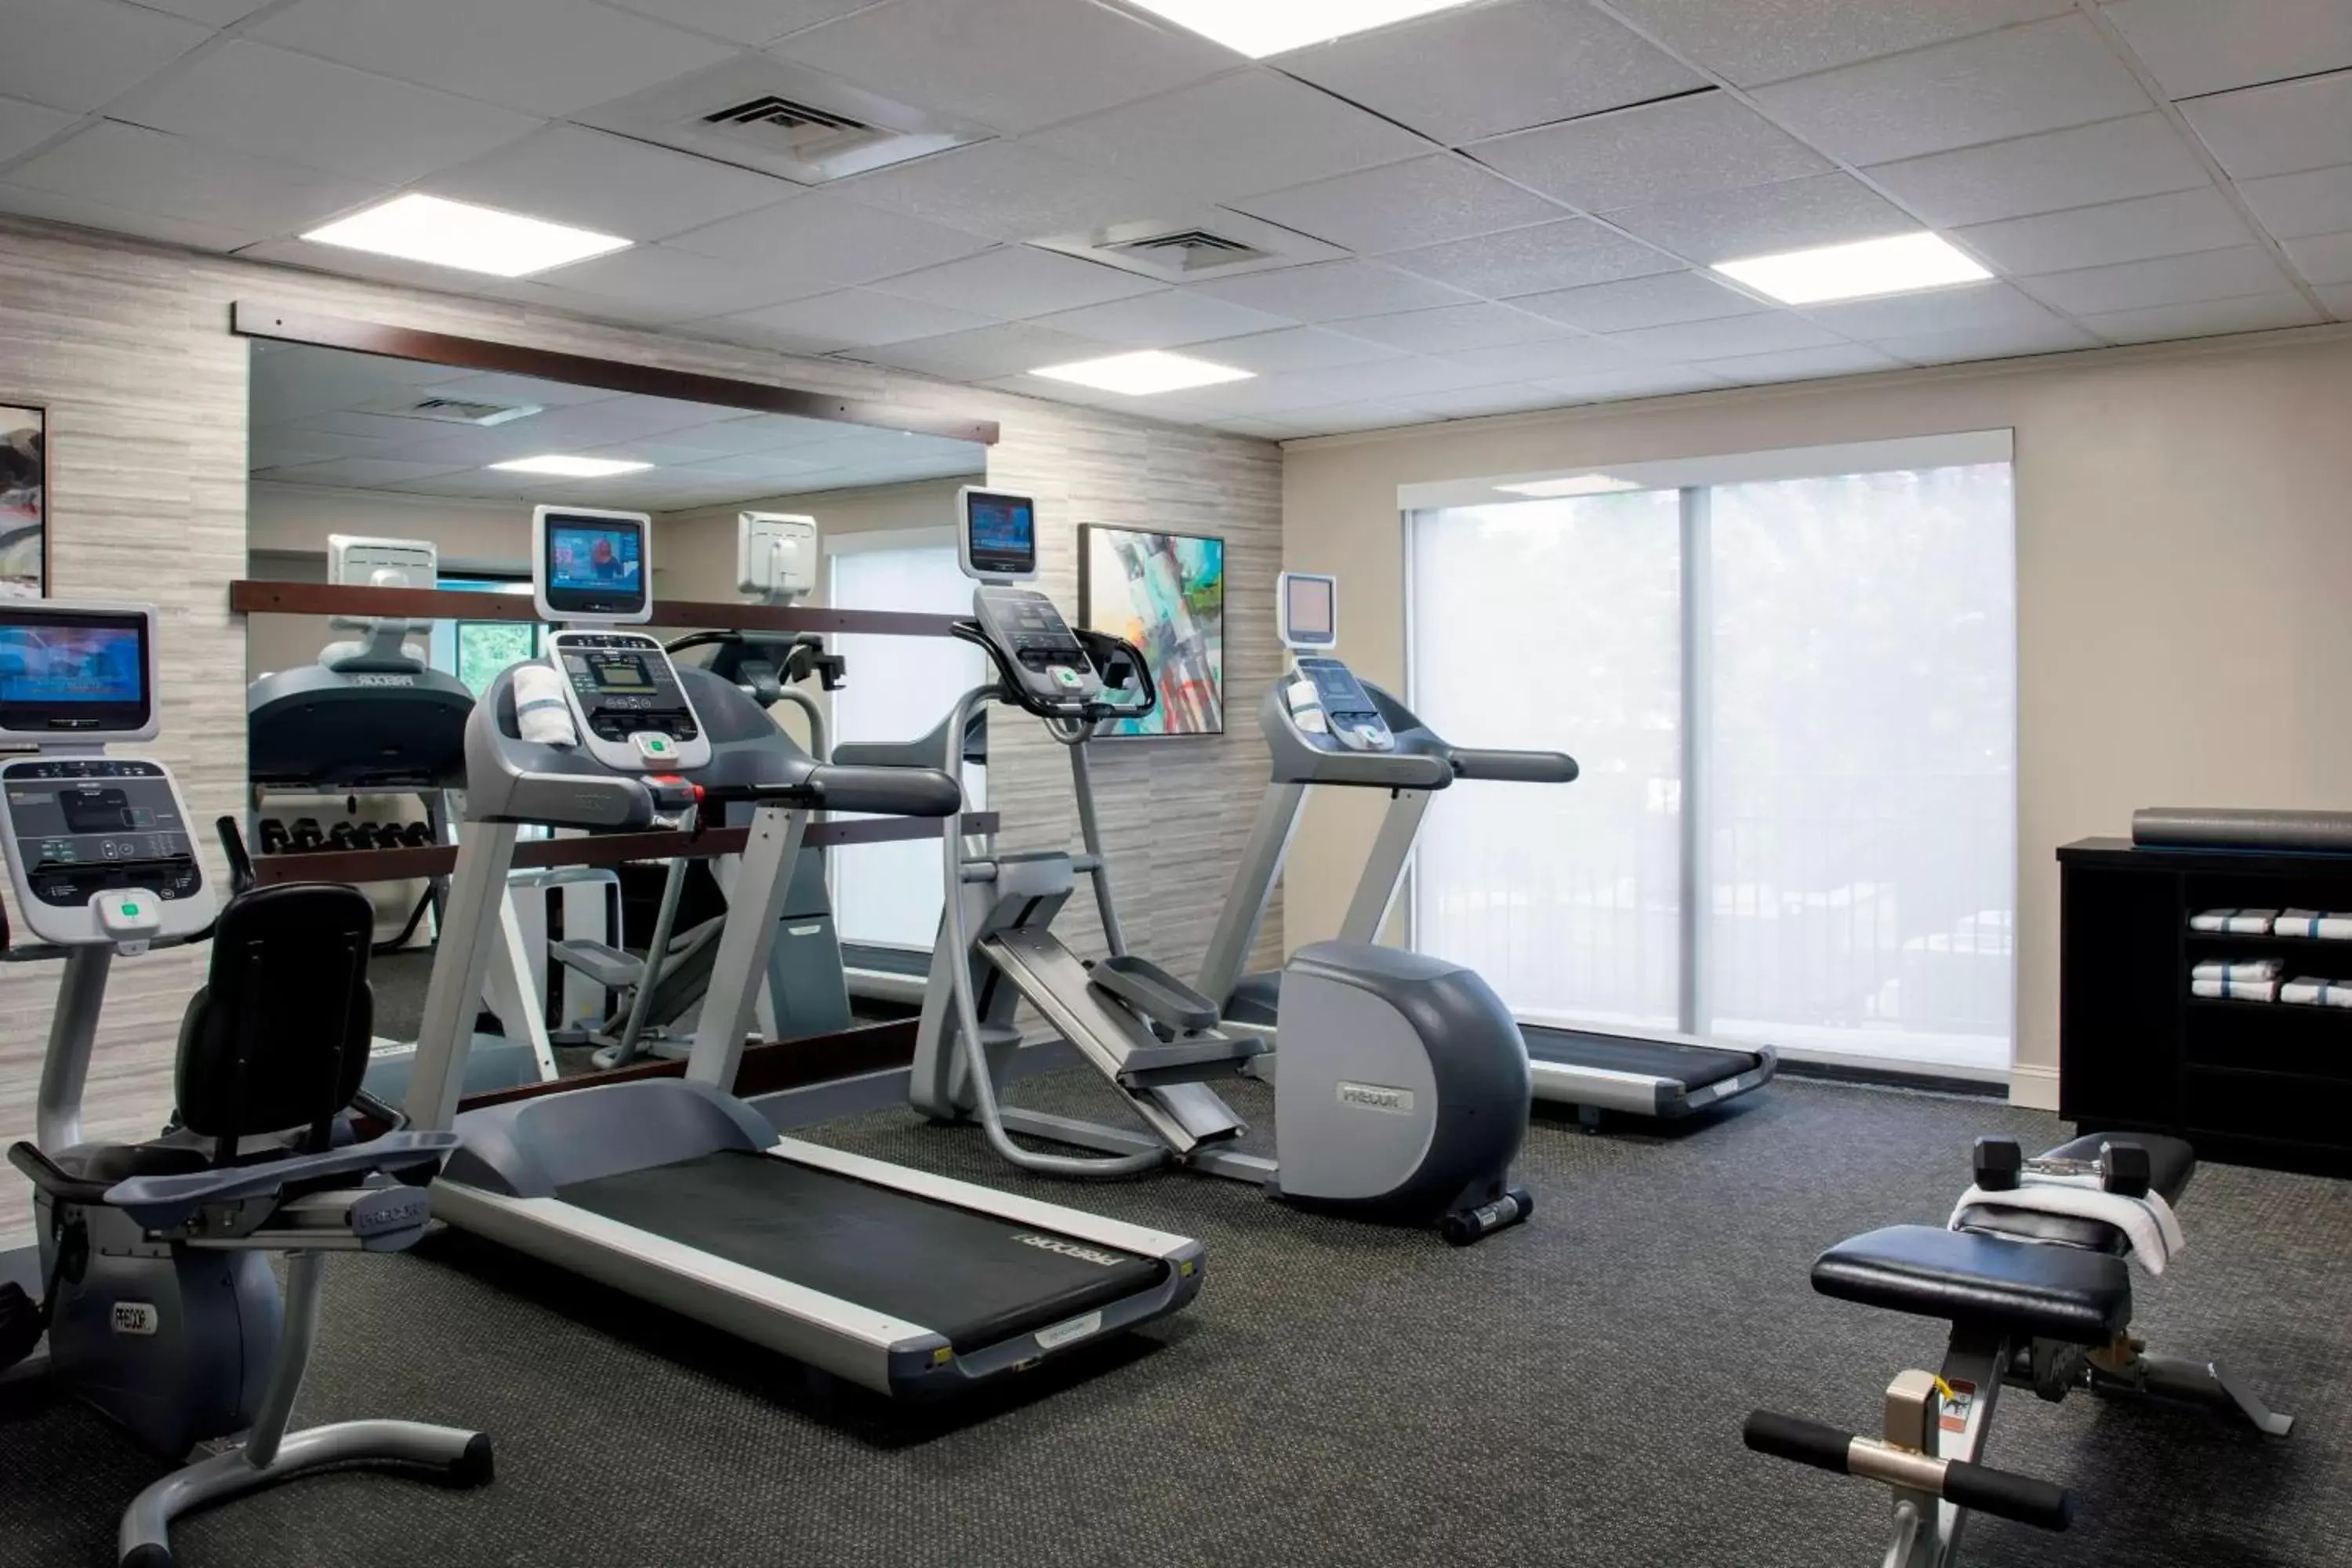 Fitness centre/facilities, Fitness Center/Facilities in Courtyard by Marriott Myrtle Beach Barefoot Landing